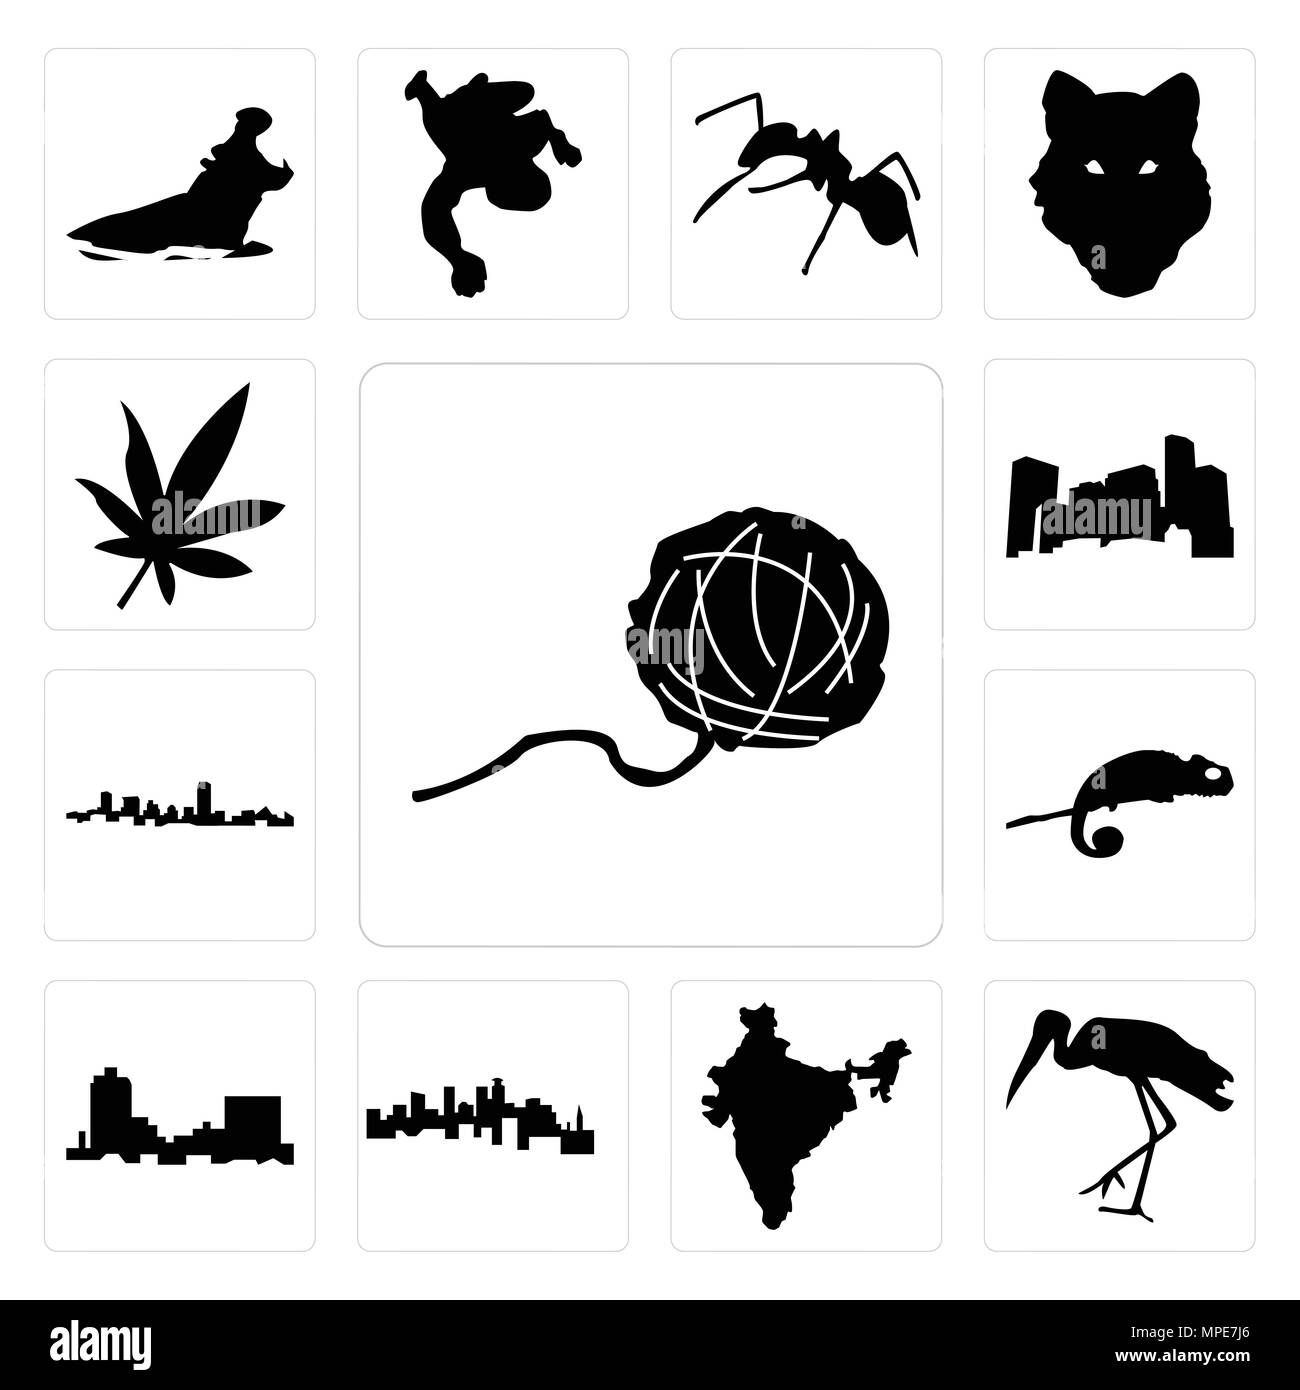 Set Of 13 simple editable icons such as yarn ball, stork, india, minnesota, montana, chameleon, maryland outline, in black, marijuana leaf can be used Stock Vector